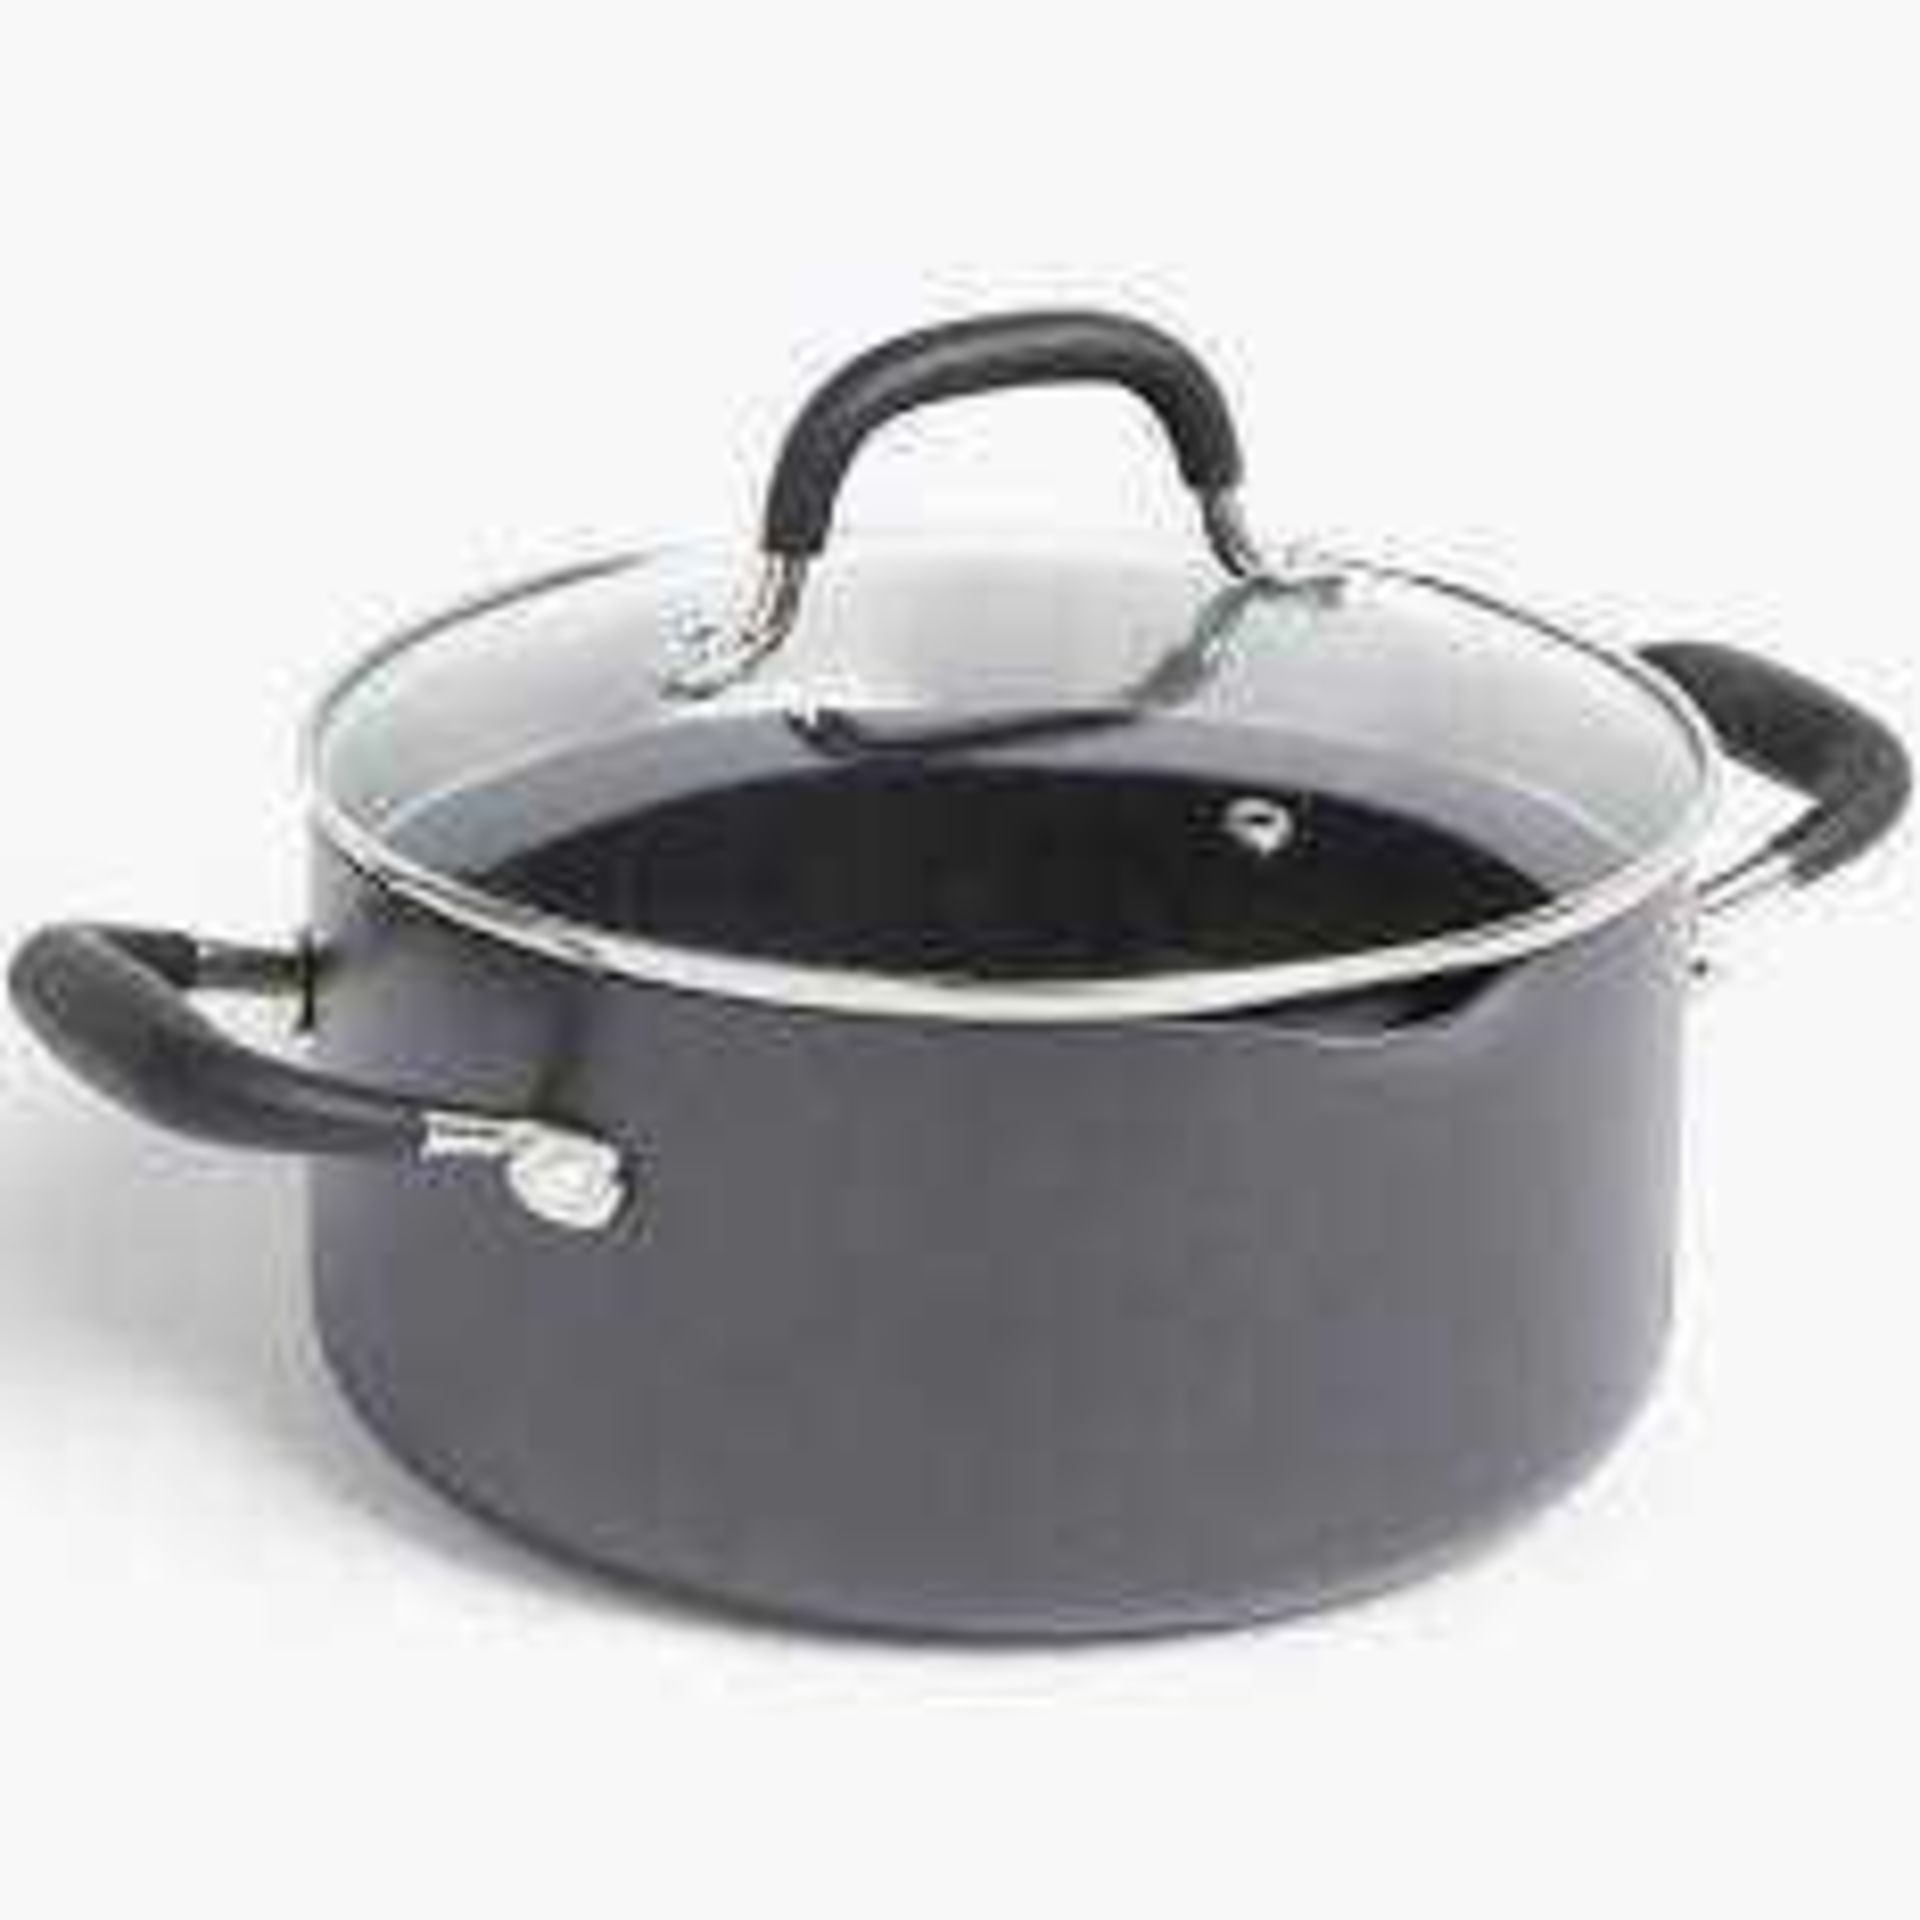 RRP £175 Lot To Contain 3 Kitchen Ware Items Including 1 Frying Pan 1 Wok And 1 Deep Pot Pan - Image 2 of 2